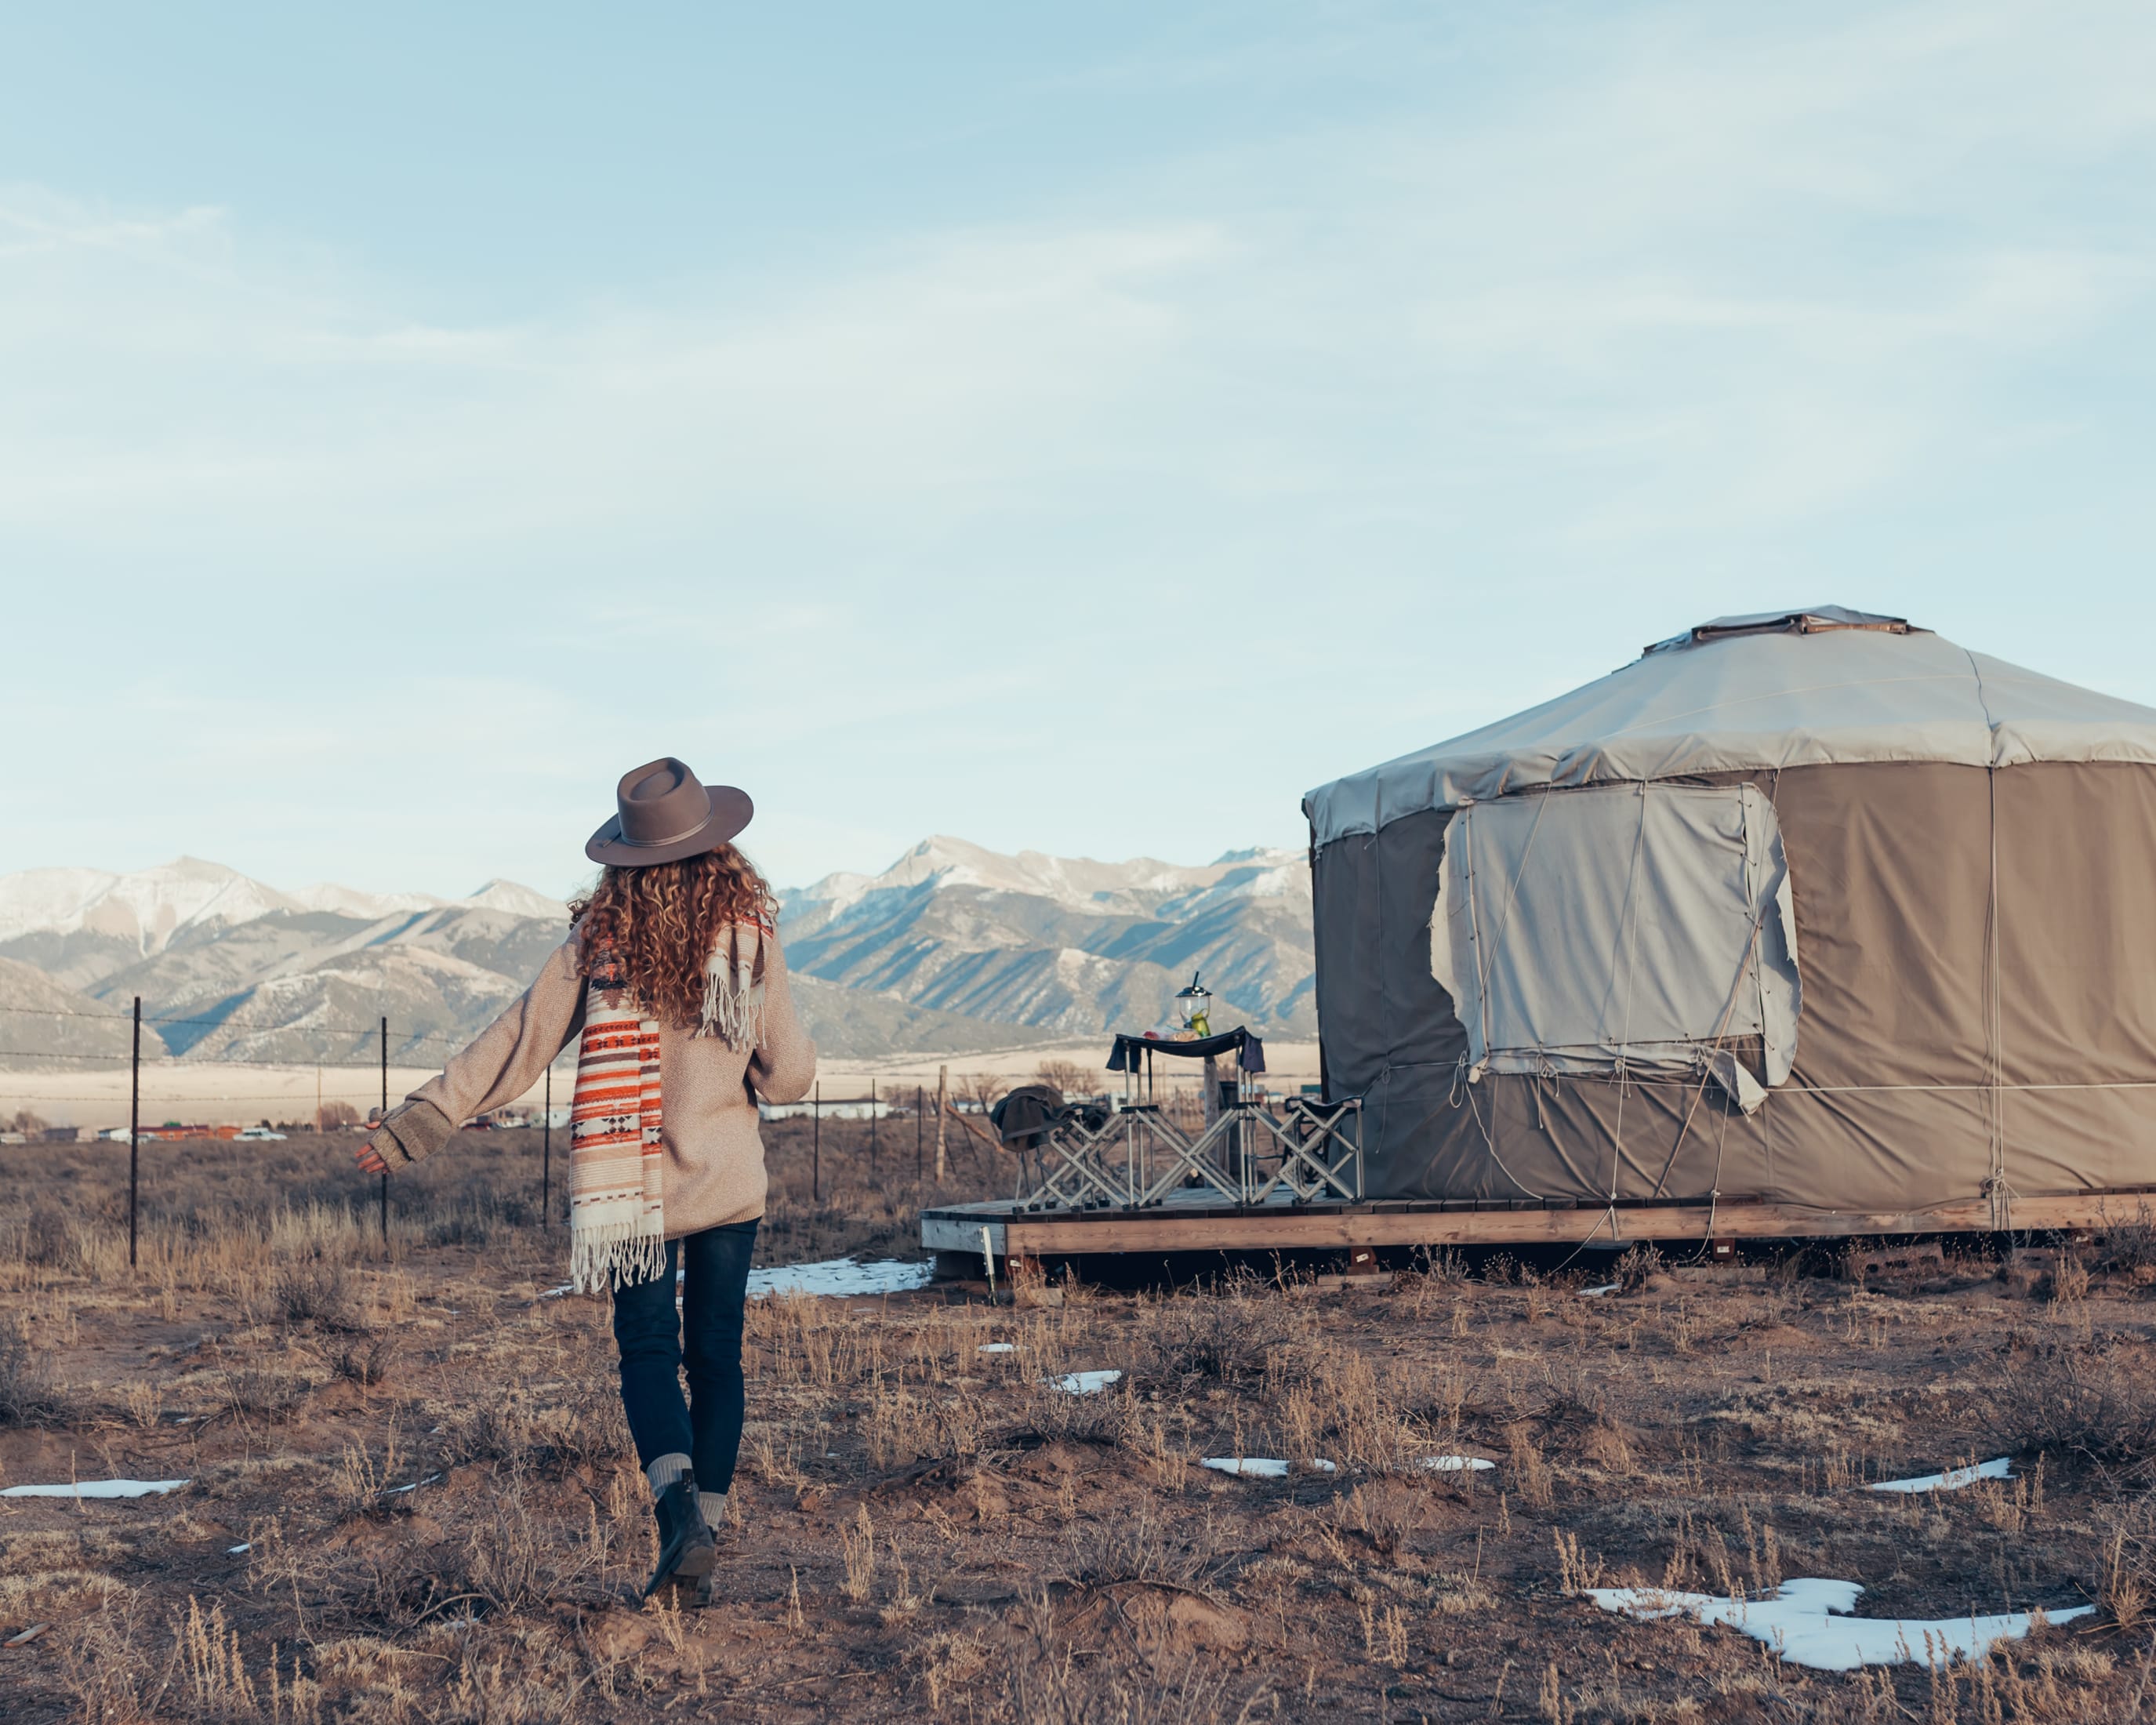 Happiness is a yurt with mountain views and camels for company. 